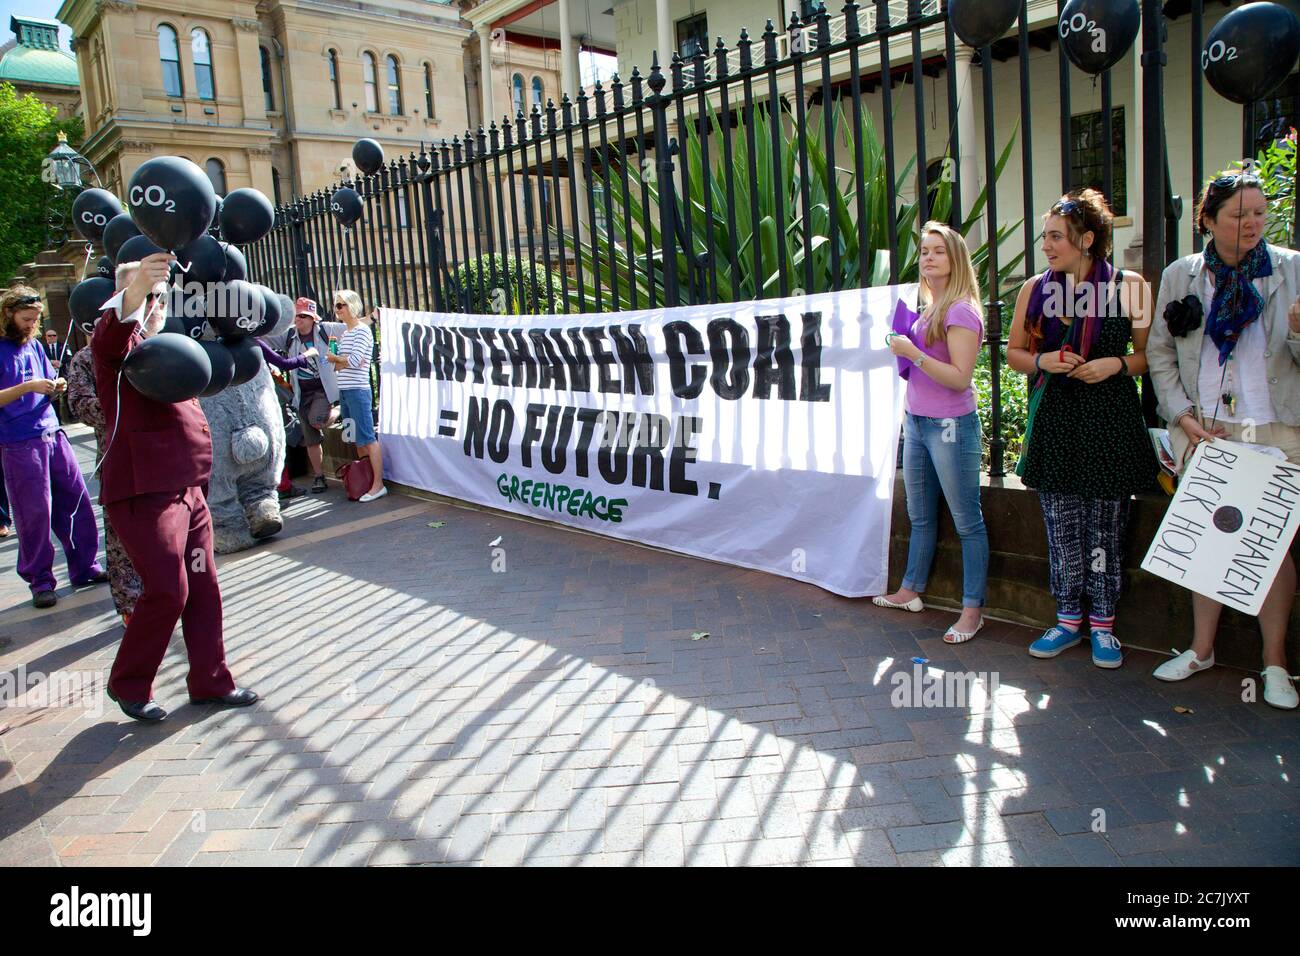 A Greenpeace banner saying, ‘Whitehaven Coal = No Future’ appears outside the location of the Whitehaven Coal AGM and people hold black balloons with Stock Photo